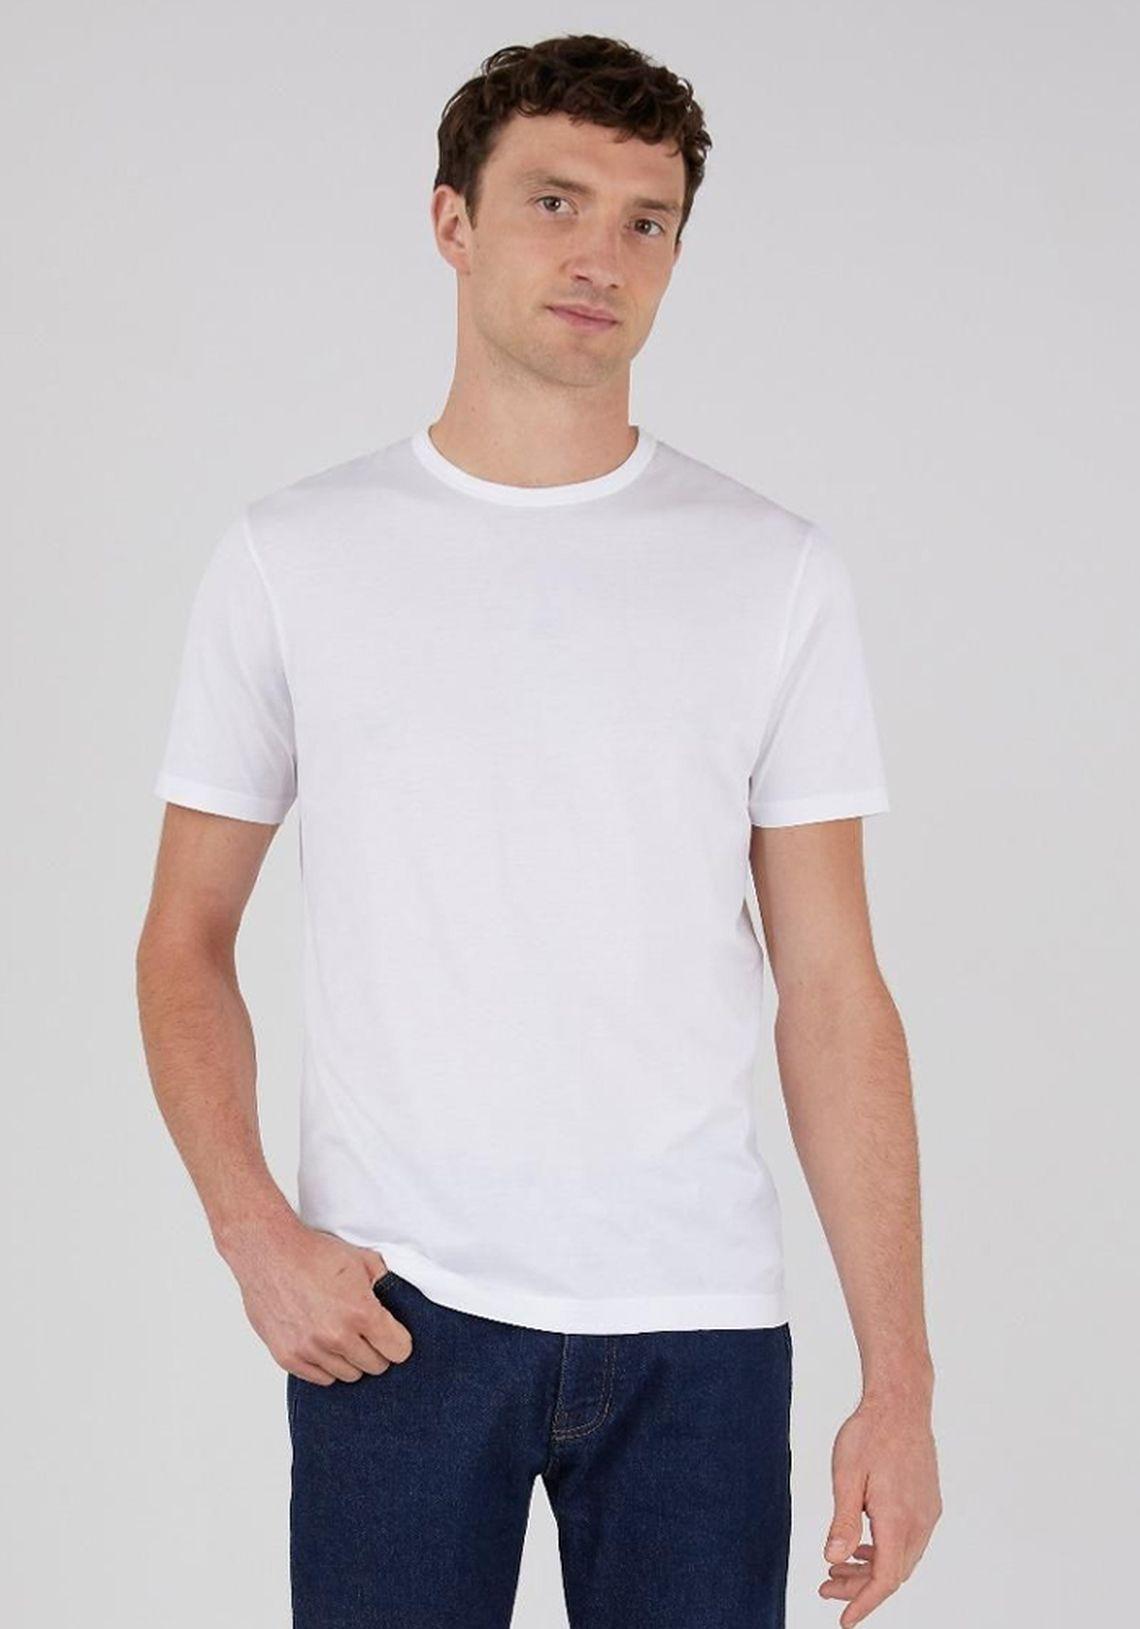 The 5 Best Brands For White T-Shirts | SL.Man